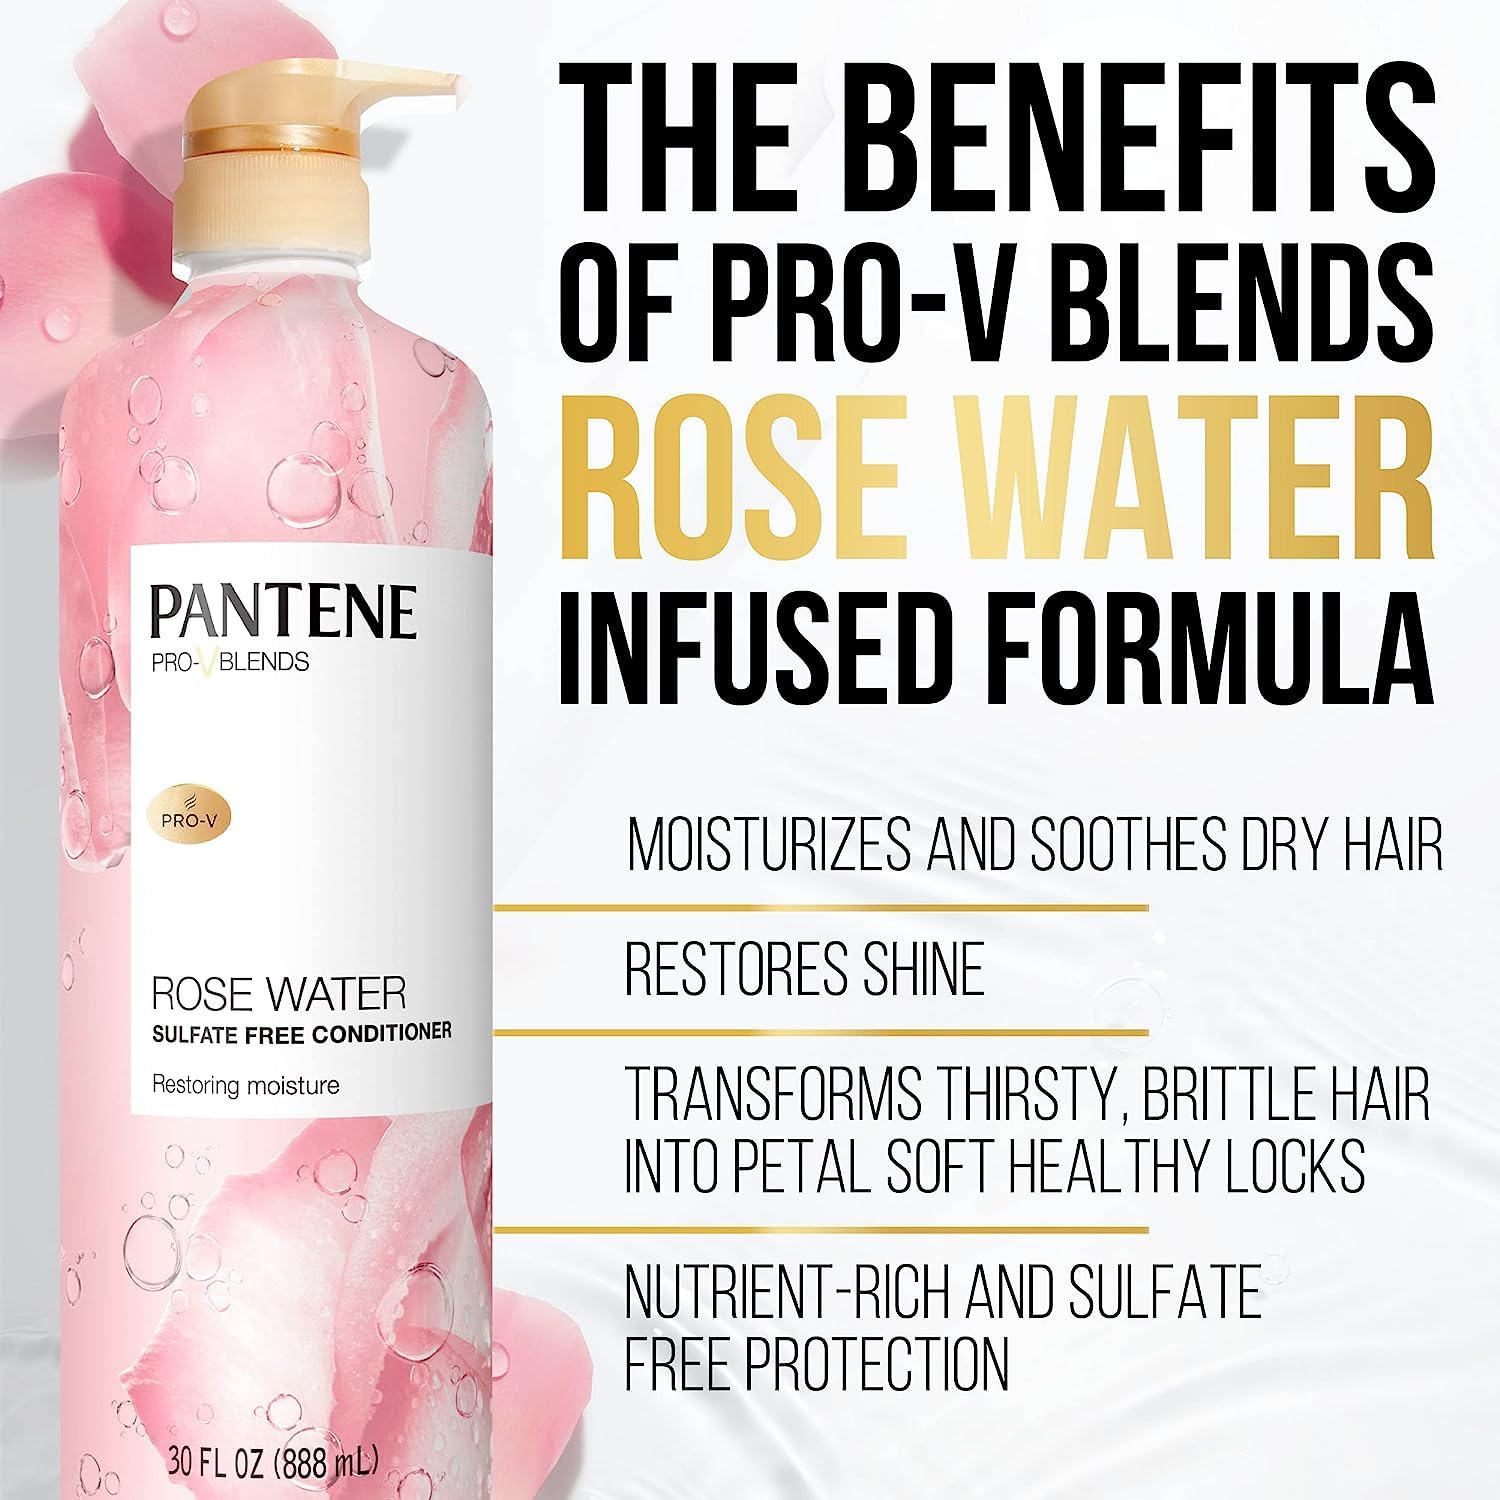 Pantene Rose Water Conditioner, Soothes, Replenishes Hydration, Safe for Color Treated Hair, Nutrient Infused with Vitamin B5 and Antioxidants, Pro-V Blends, 30.0 oz